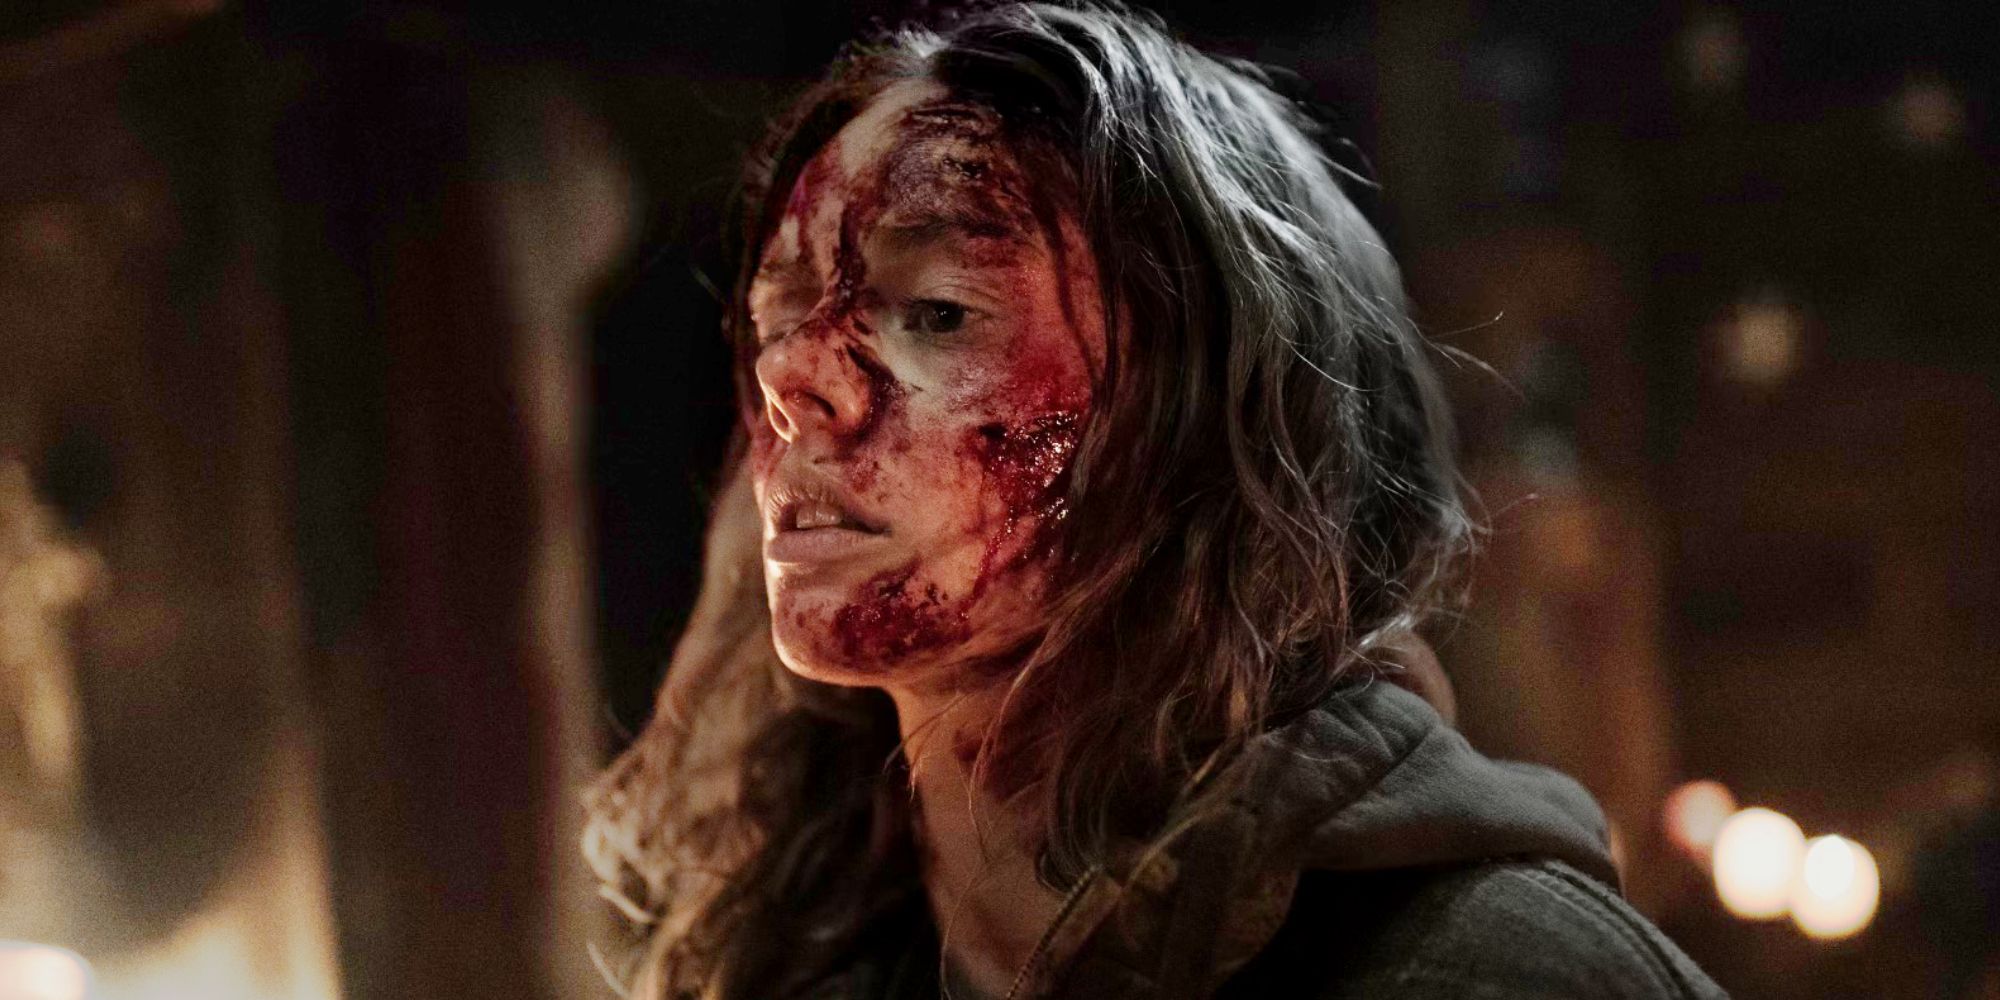 Ready Or Not Star Is Soaked In Blood Again In New Horror Movie Image